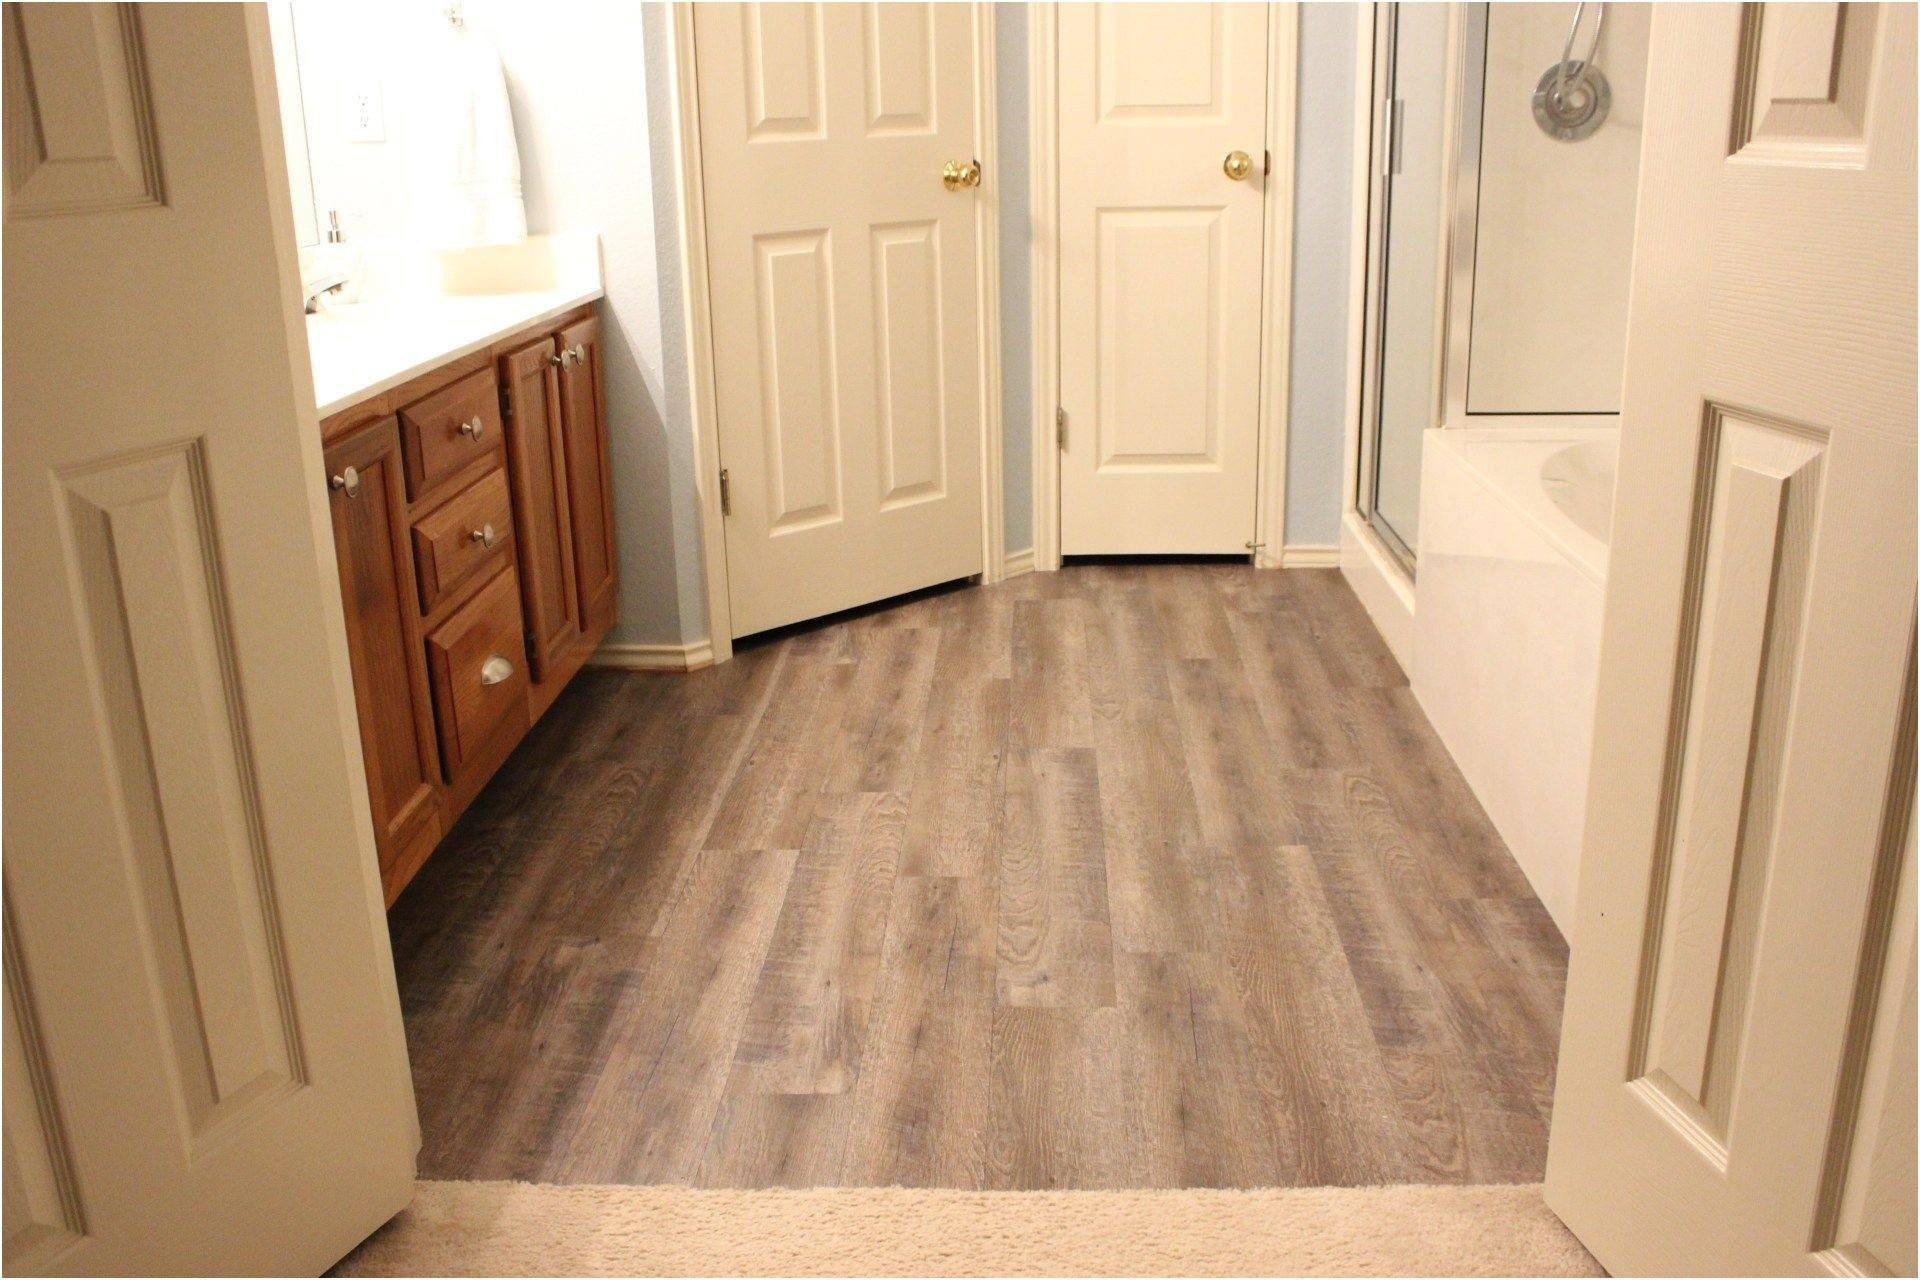 21 Cute Hardwood Flooring Detroit Mi 2024 free download hardwood flooring detroit mi of 20 flooring stores in my area amazing design best flooring ideas for laminate flooring stores new decorating an open floor plan living room awesome design pla